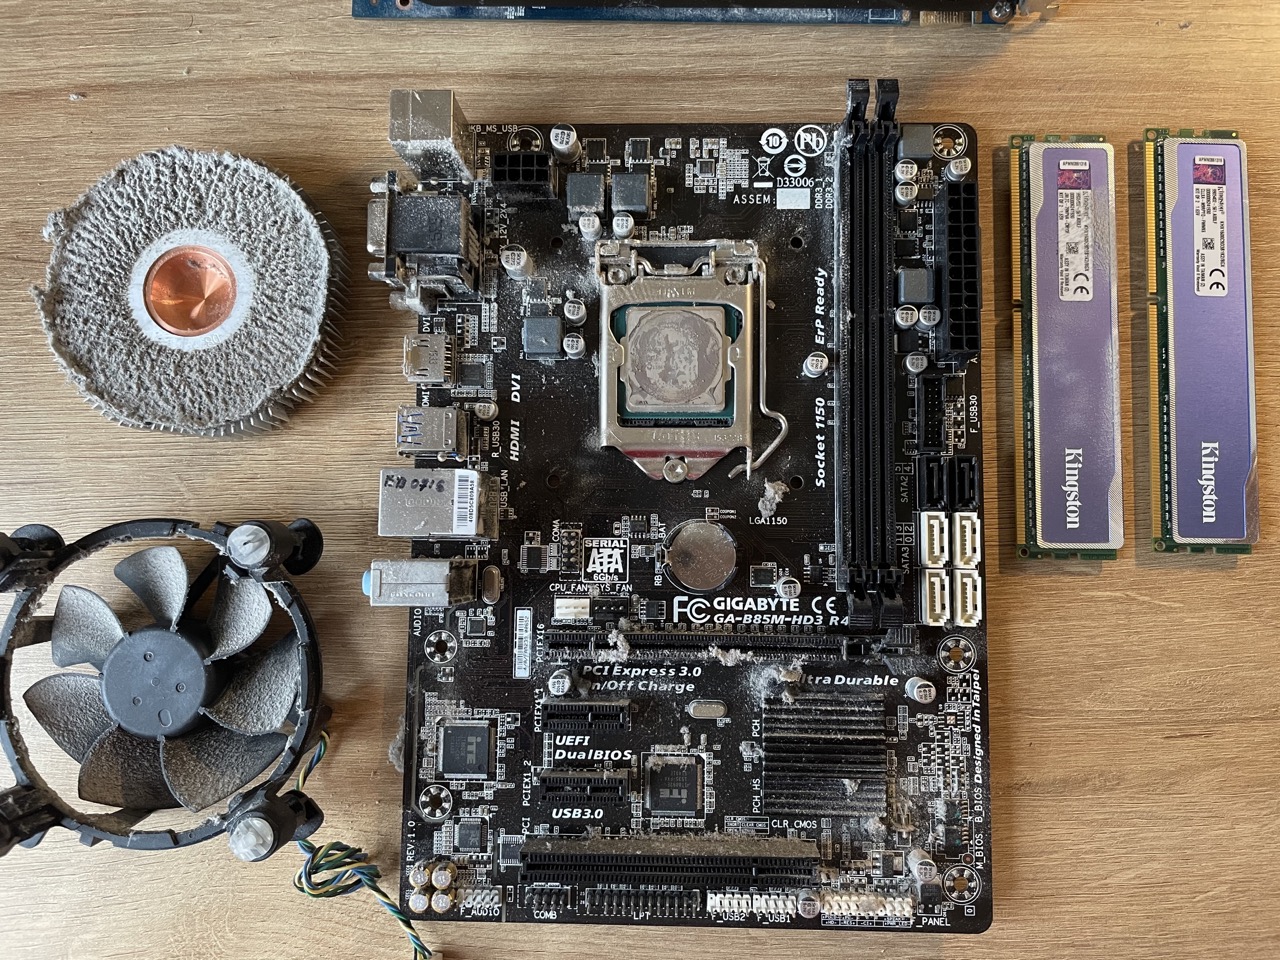 Dusty motherboard and cpu cooler before the cleaning